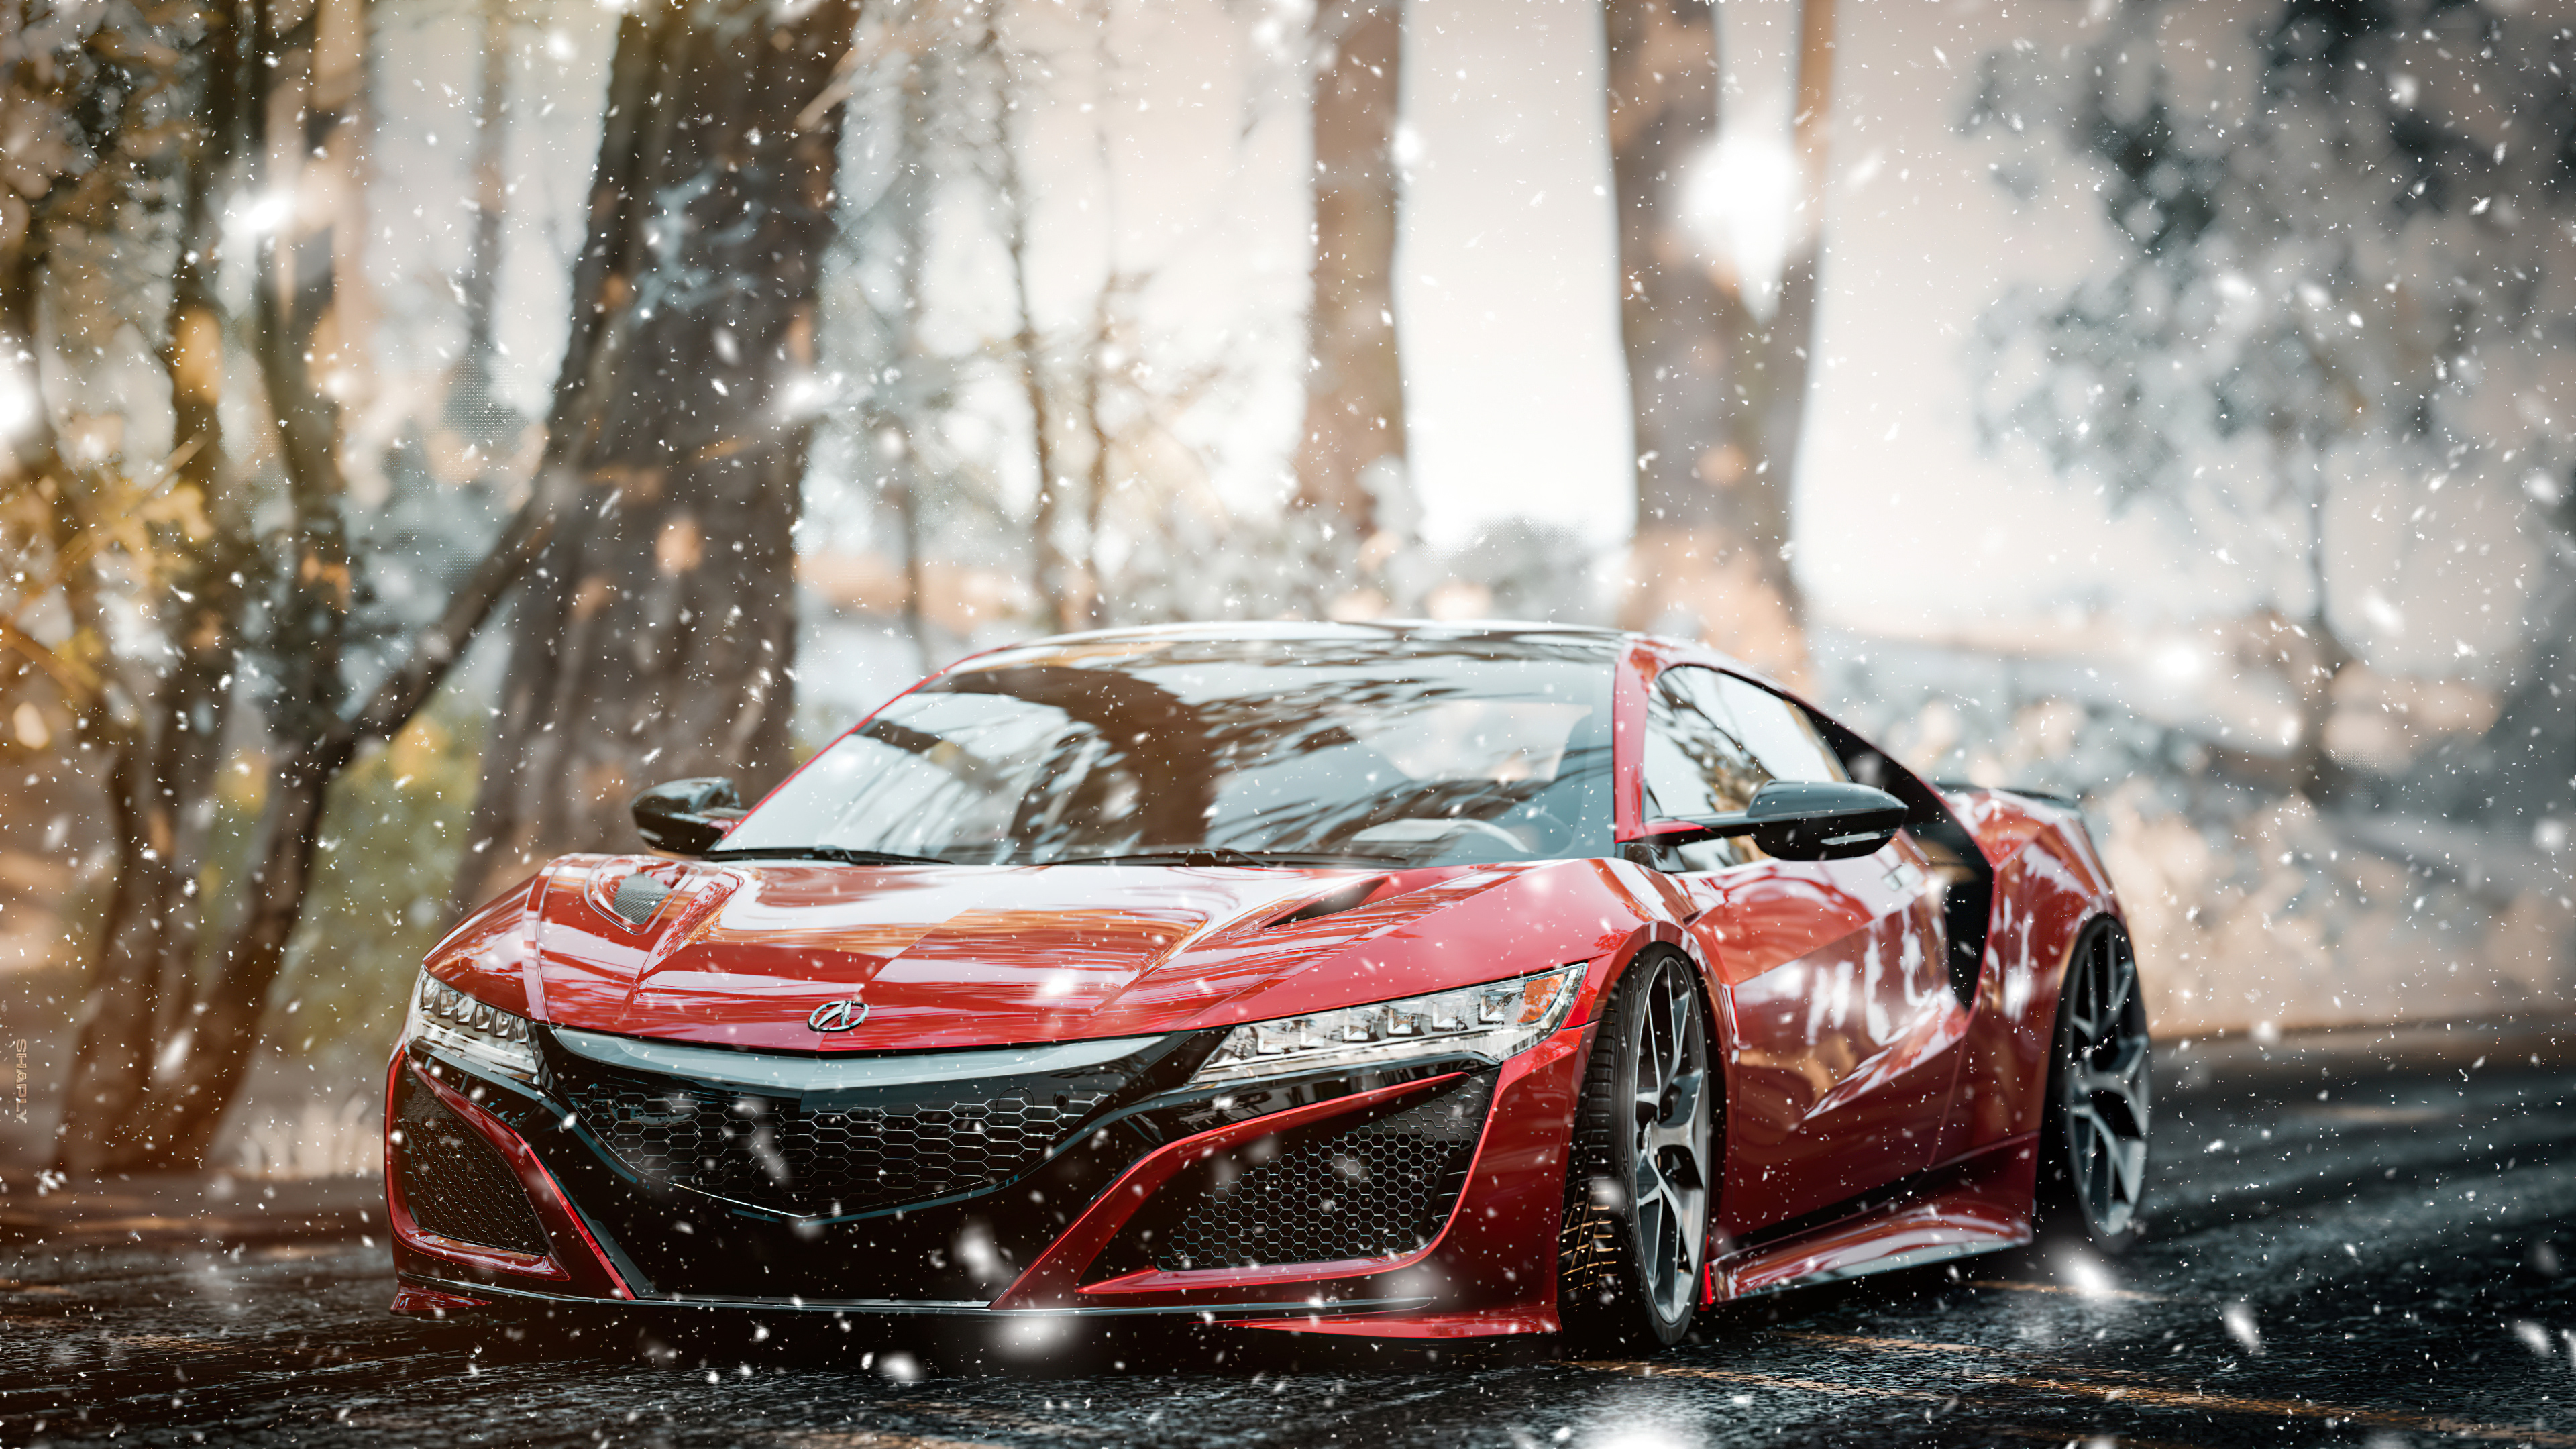 Video Game Forza Horizon 4 HD Wallpaper by Ayghan